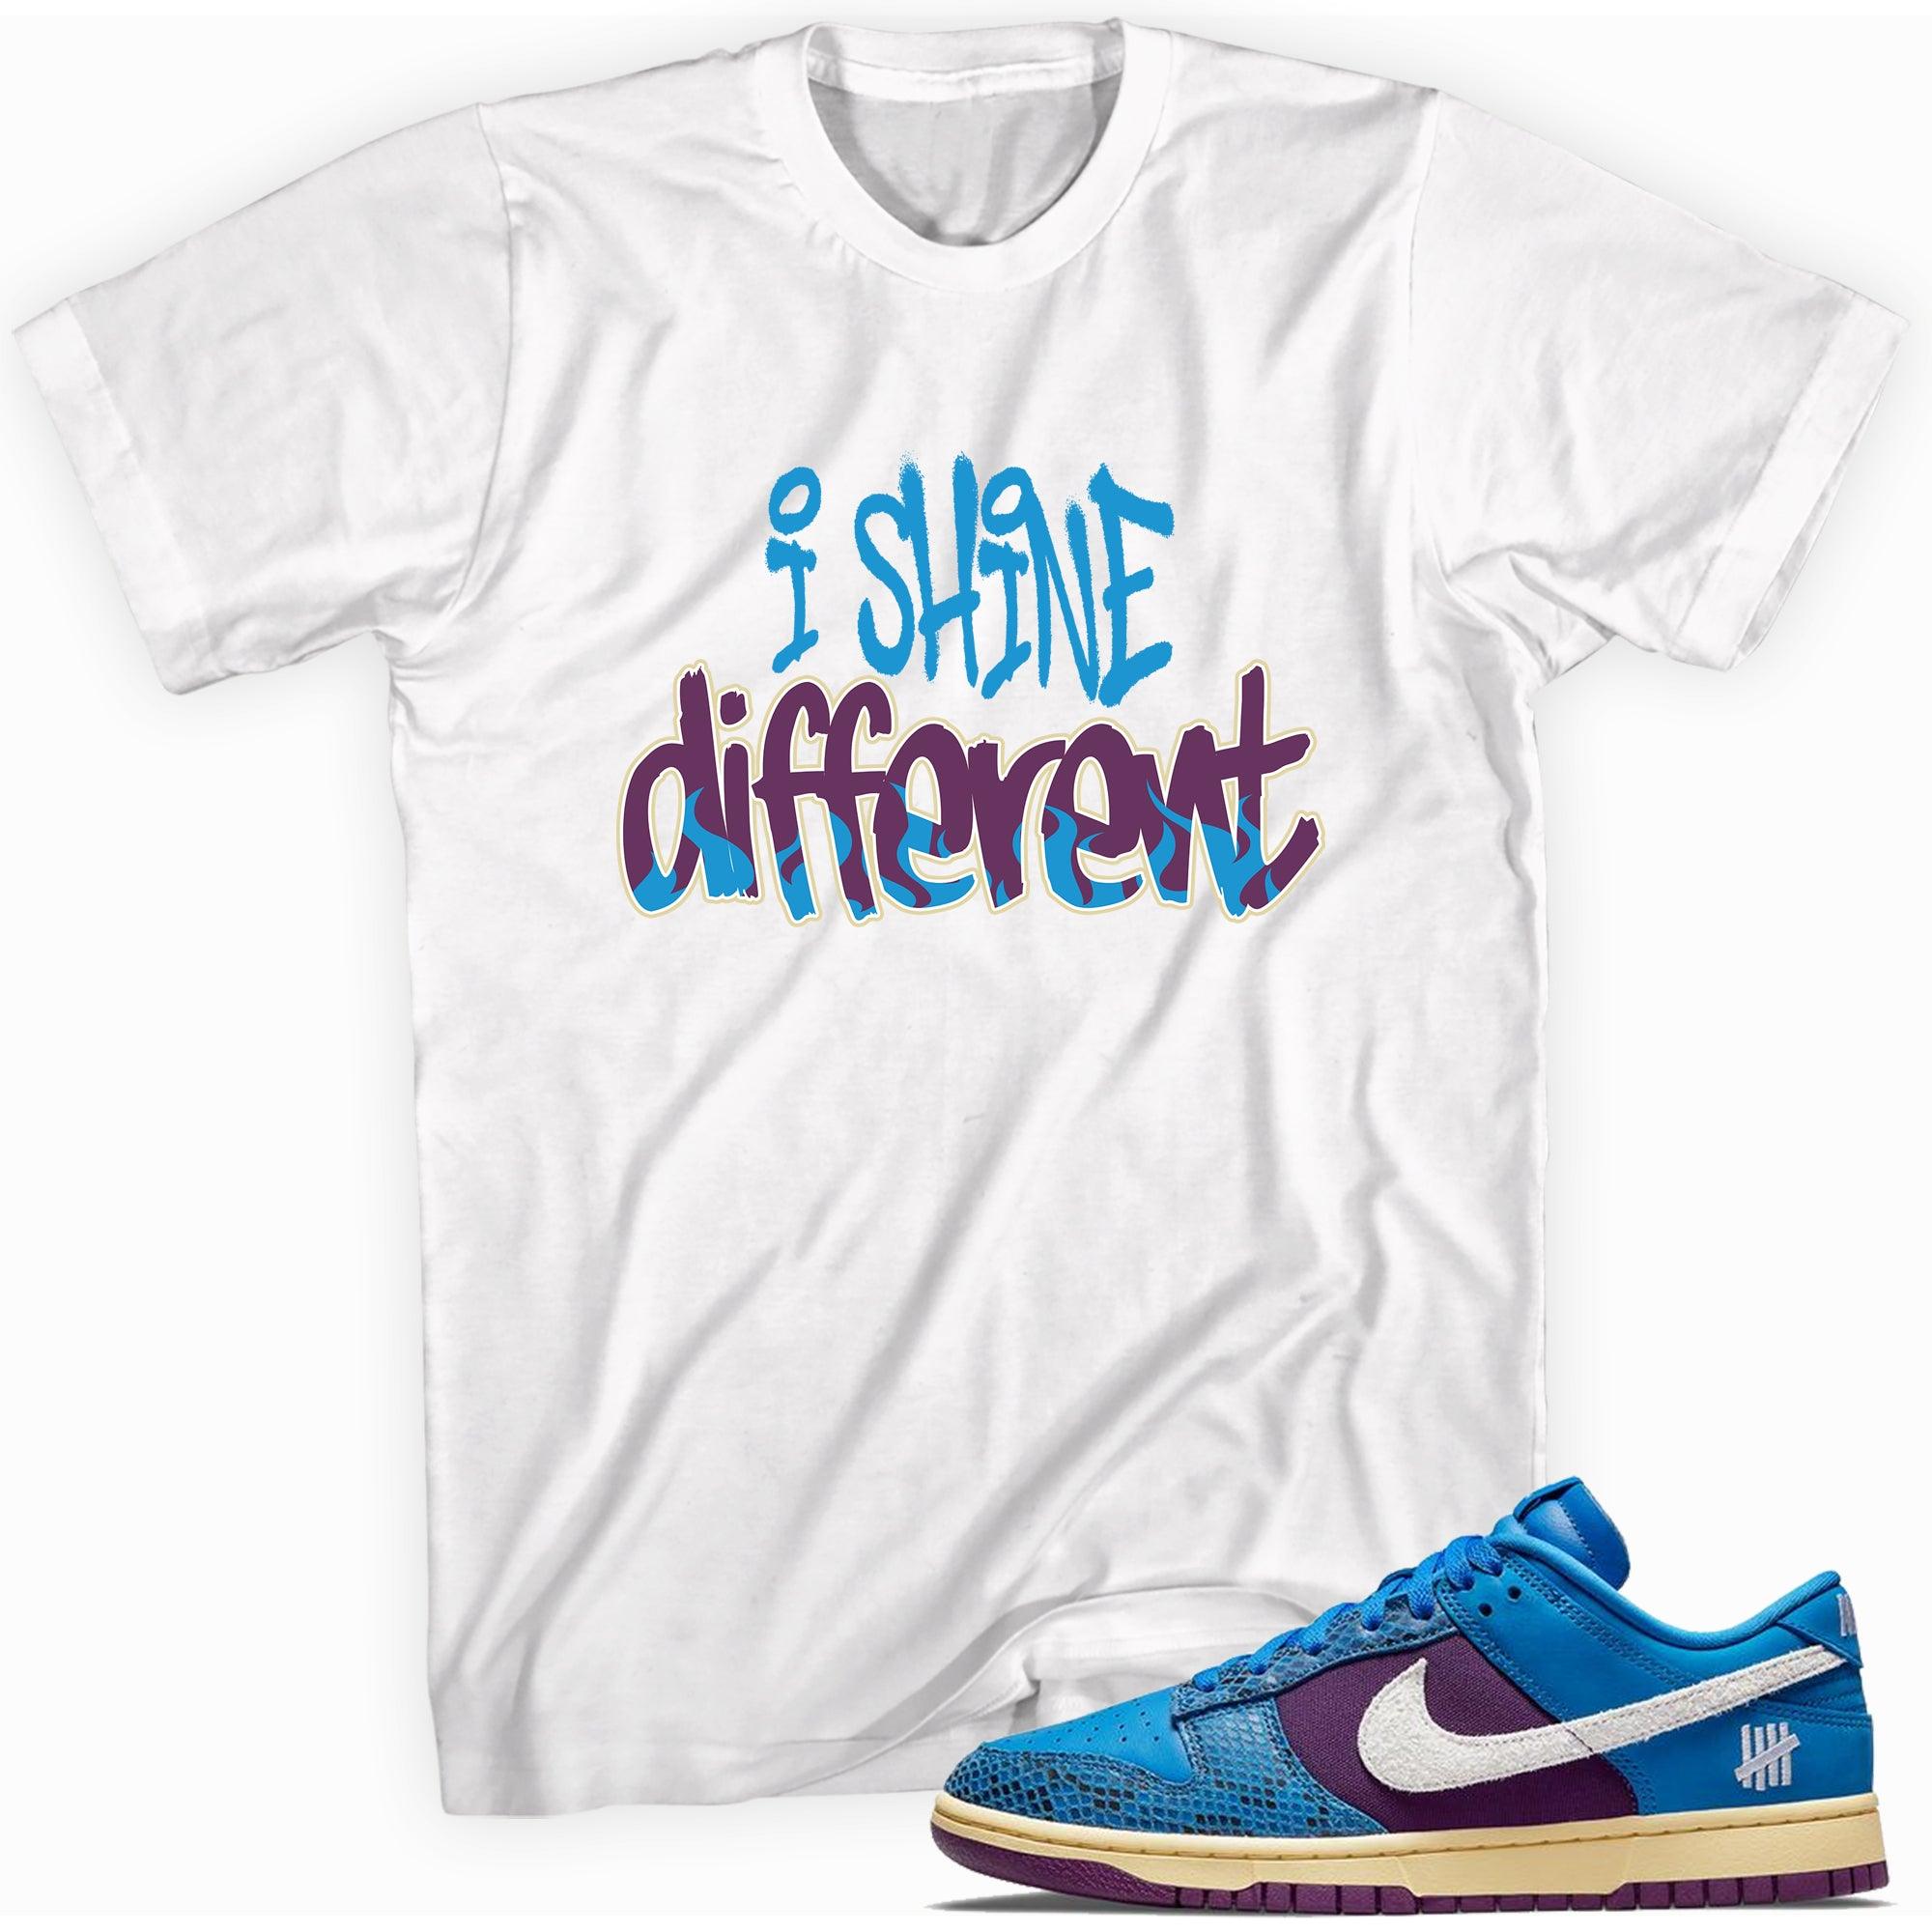 I Shine Different Shirt Nike Dunks Low Undefeated 5 On It Dunk vs AF1 photo